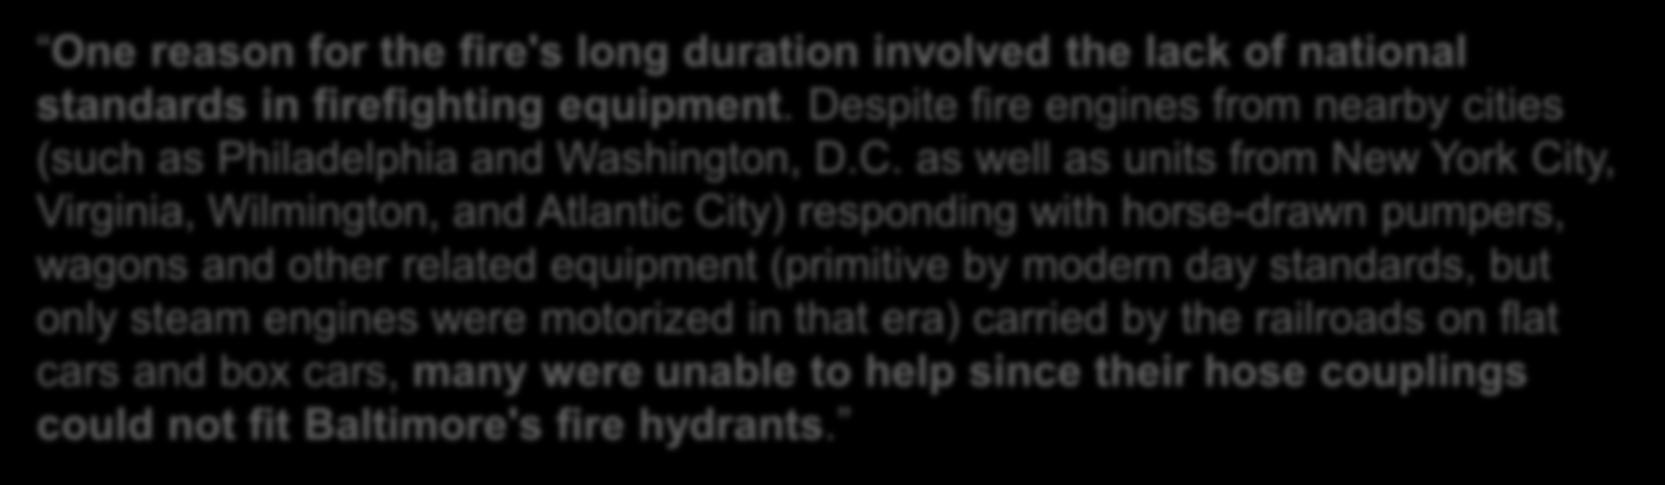 Baltimore standards One reason for the fire's long duration involved the lack of national standards in firefighting equipment.